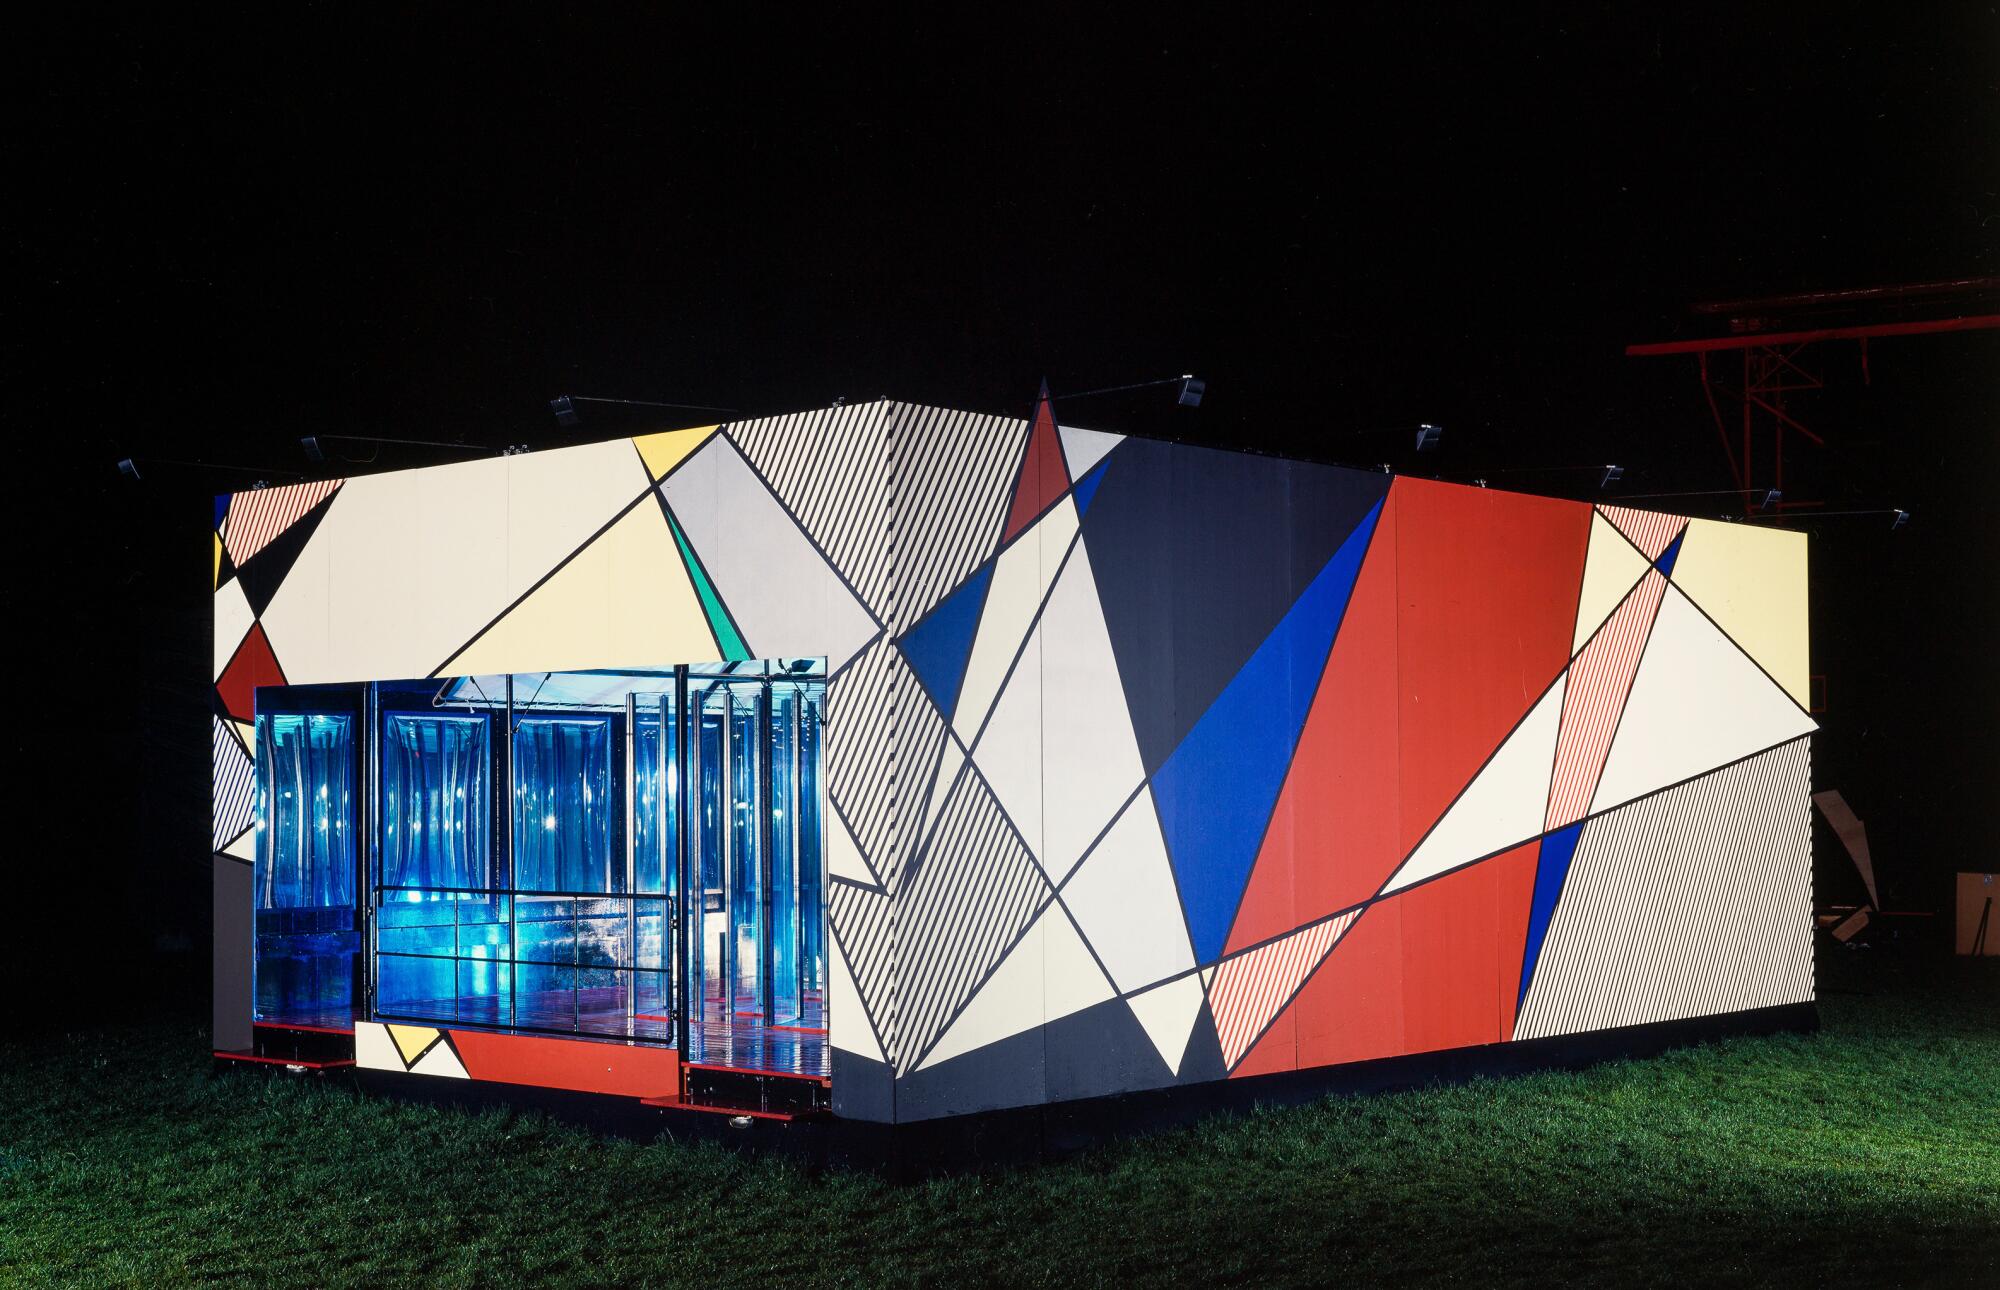 A colorful, free-standing rectangle decorated with geometric designs